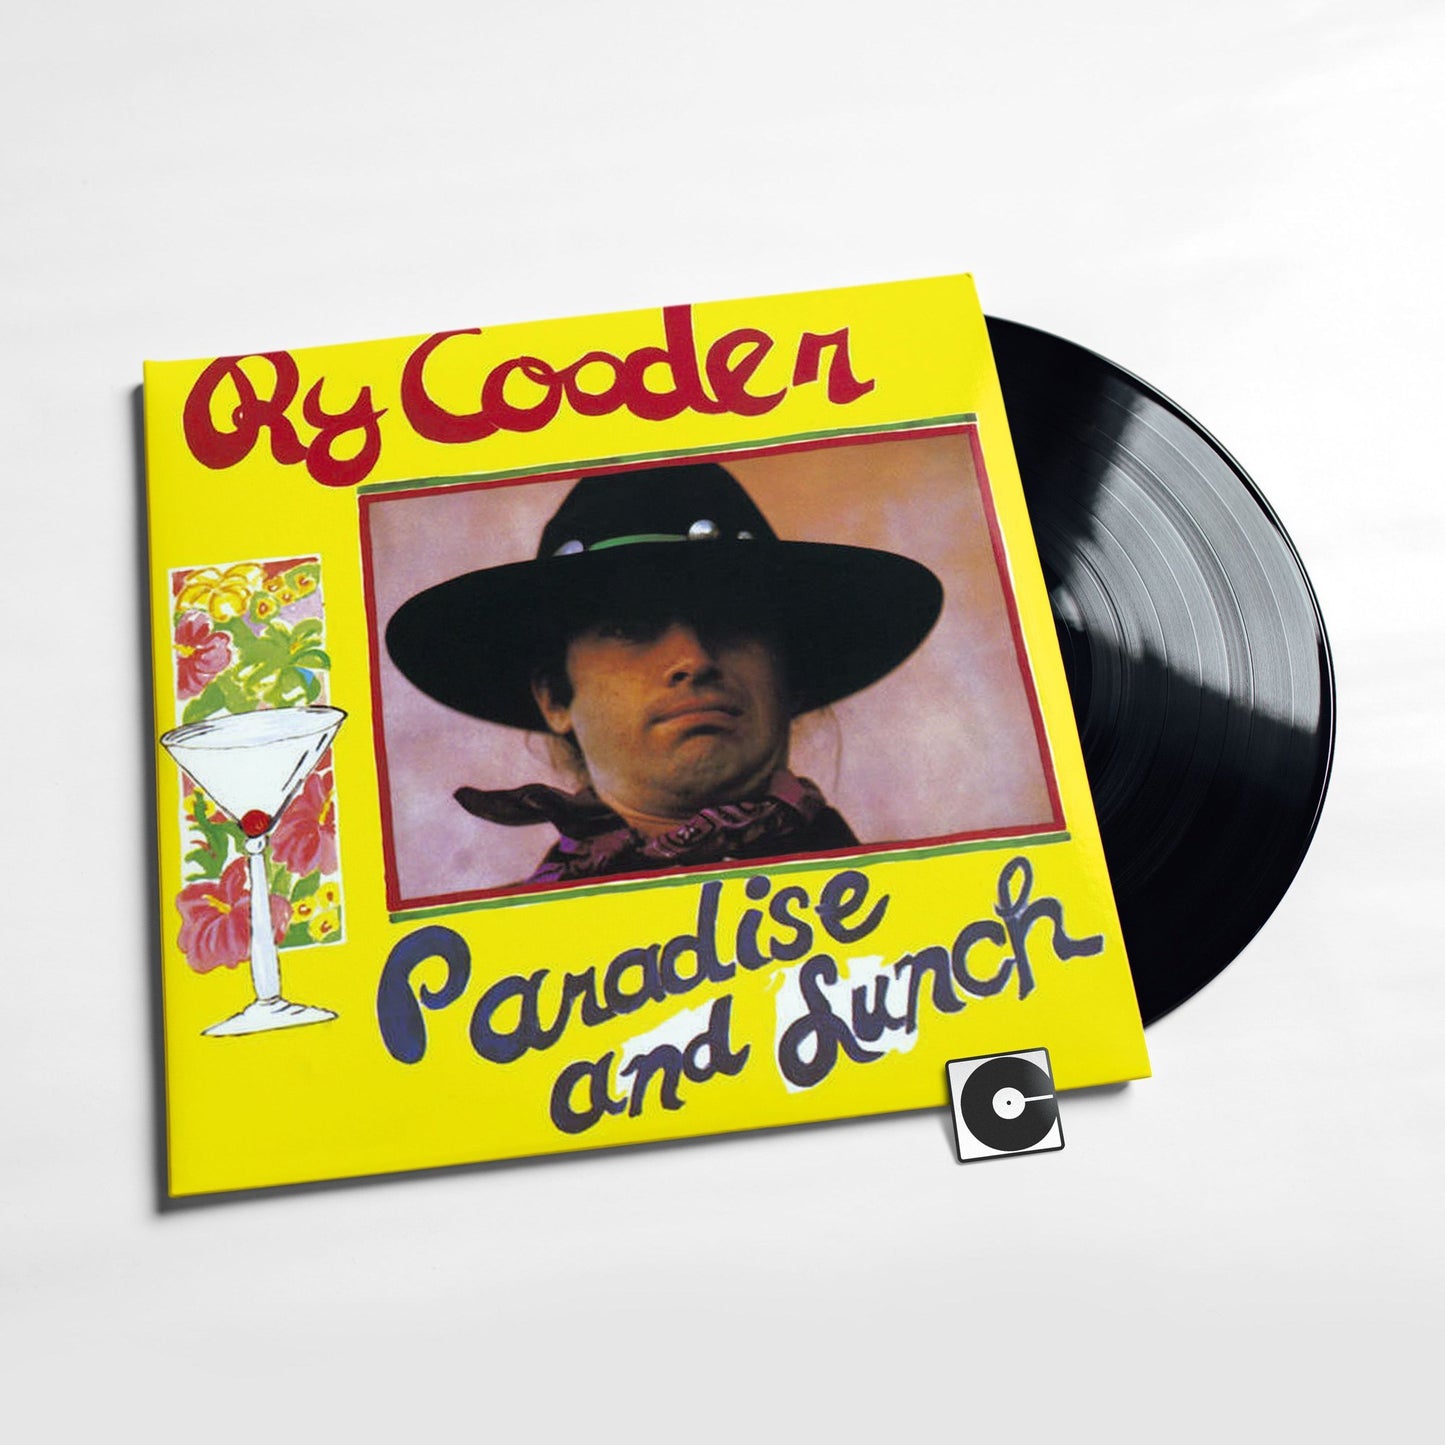 Ry Cooder - "Paradise and Lunch"